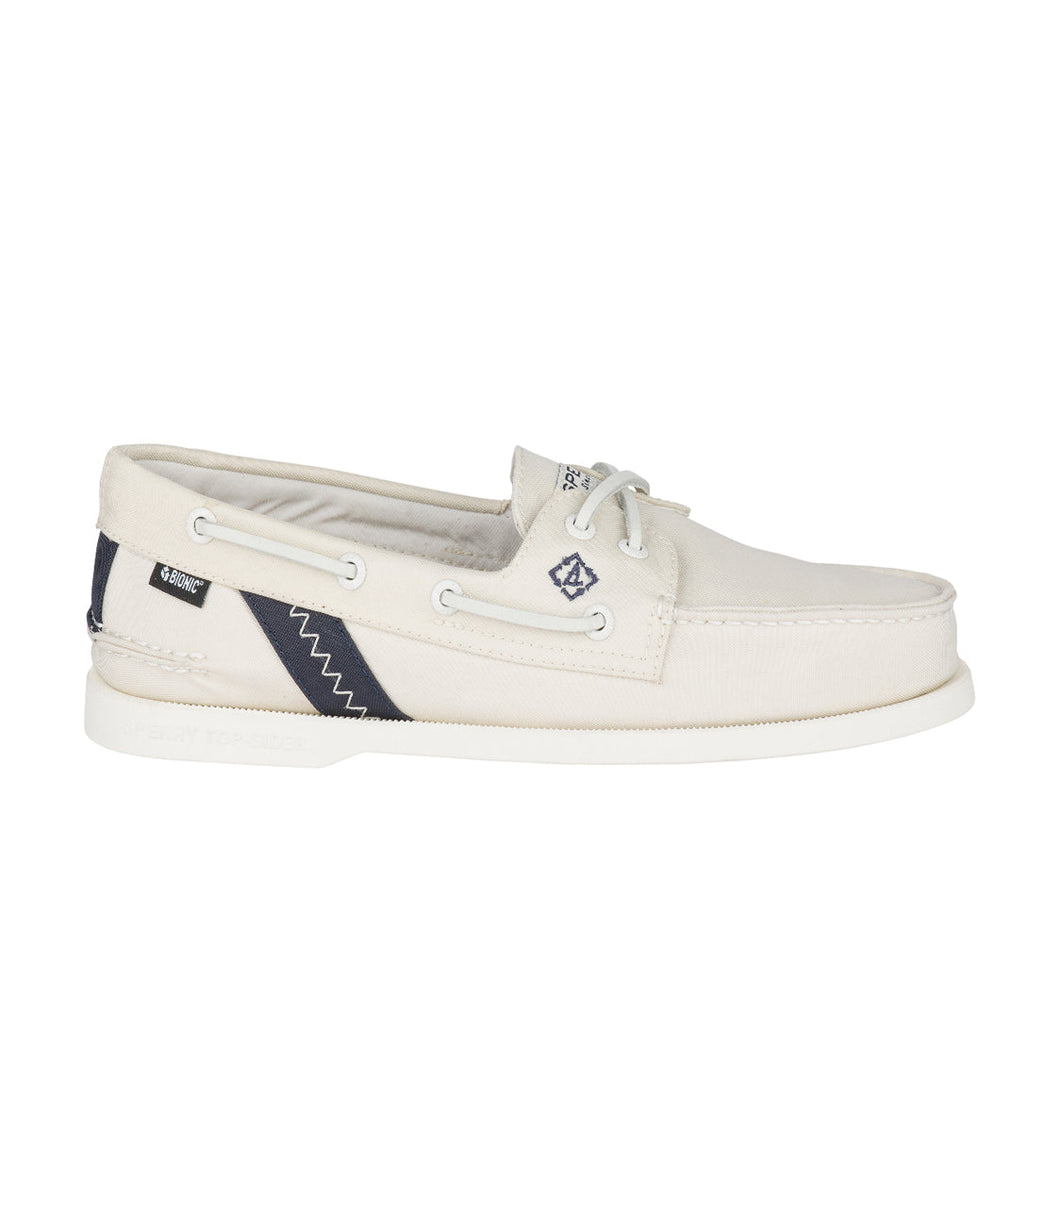 Sperry Men's A/O 2-eye Bionic / Off White (STS215810)